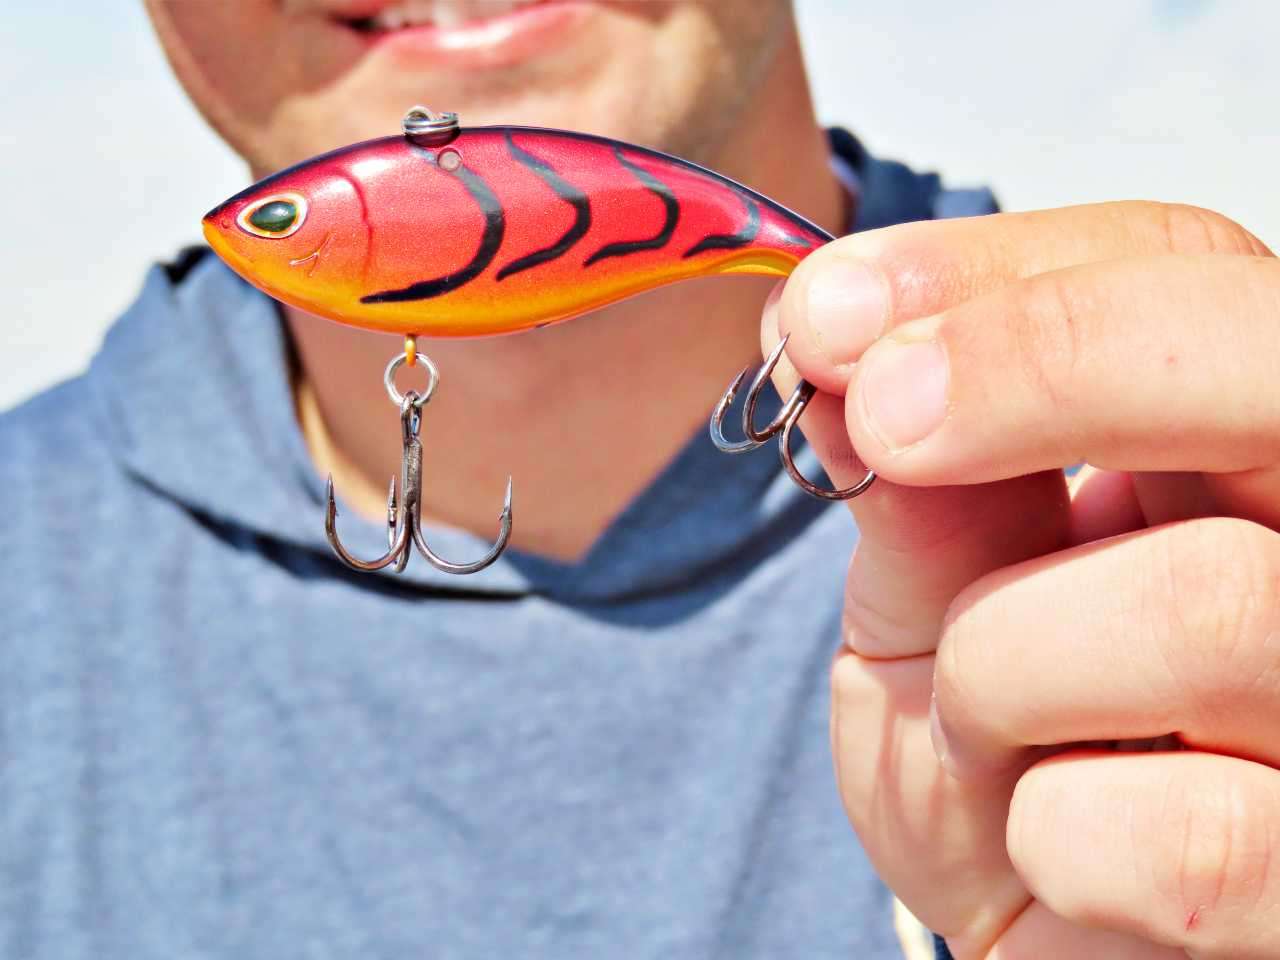 The choice is a Storm Arashi Vibe, which produces a soft knock from a single rattle for attracting without intimidating shallow fish. âItâs perfect for fishing in the spawning pockets and through shallow rock.â 
